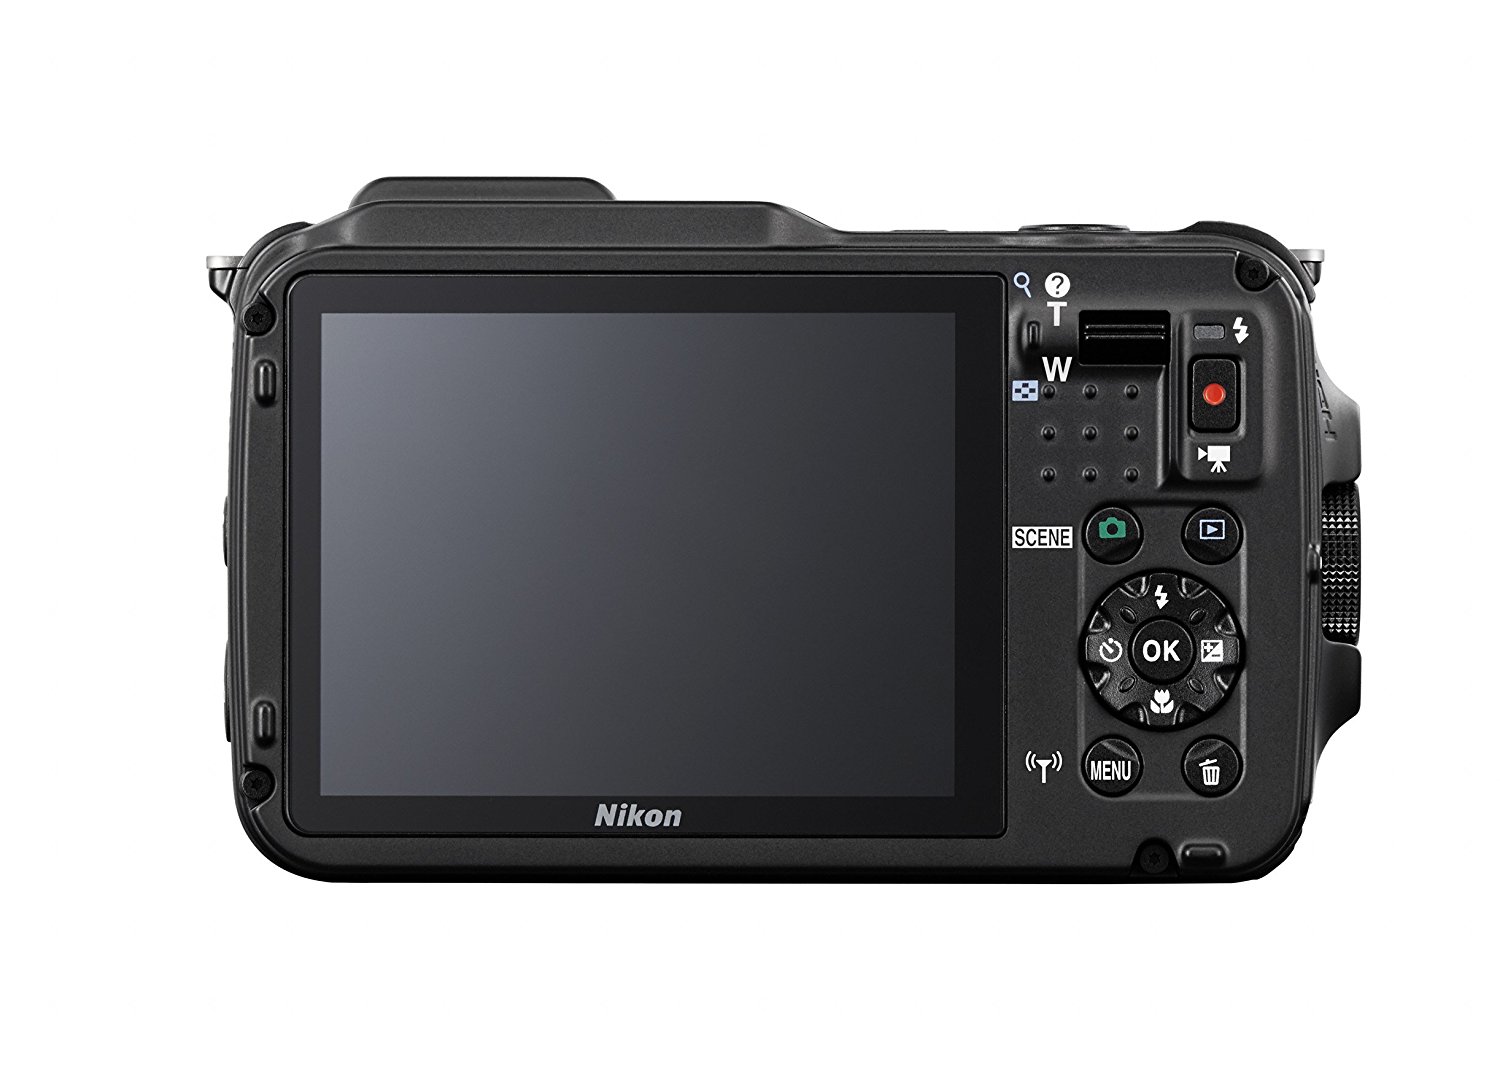 Nikon Coolpix Aw120 161 Mp Wi Fi And Waterproof Digital Camera With Gps And Full Hd 1080p Video 8829